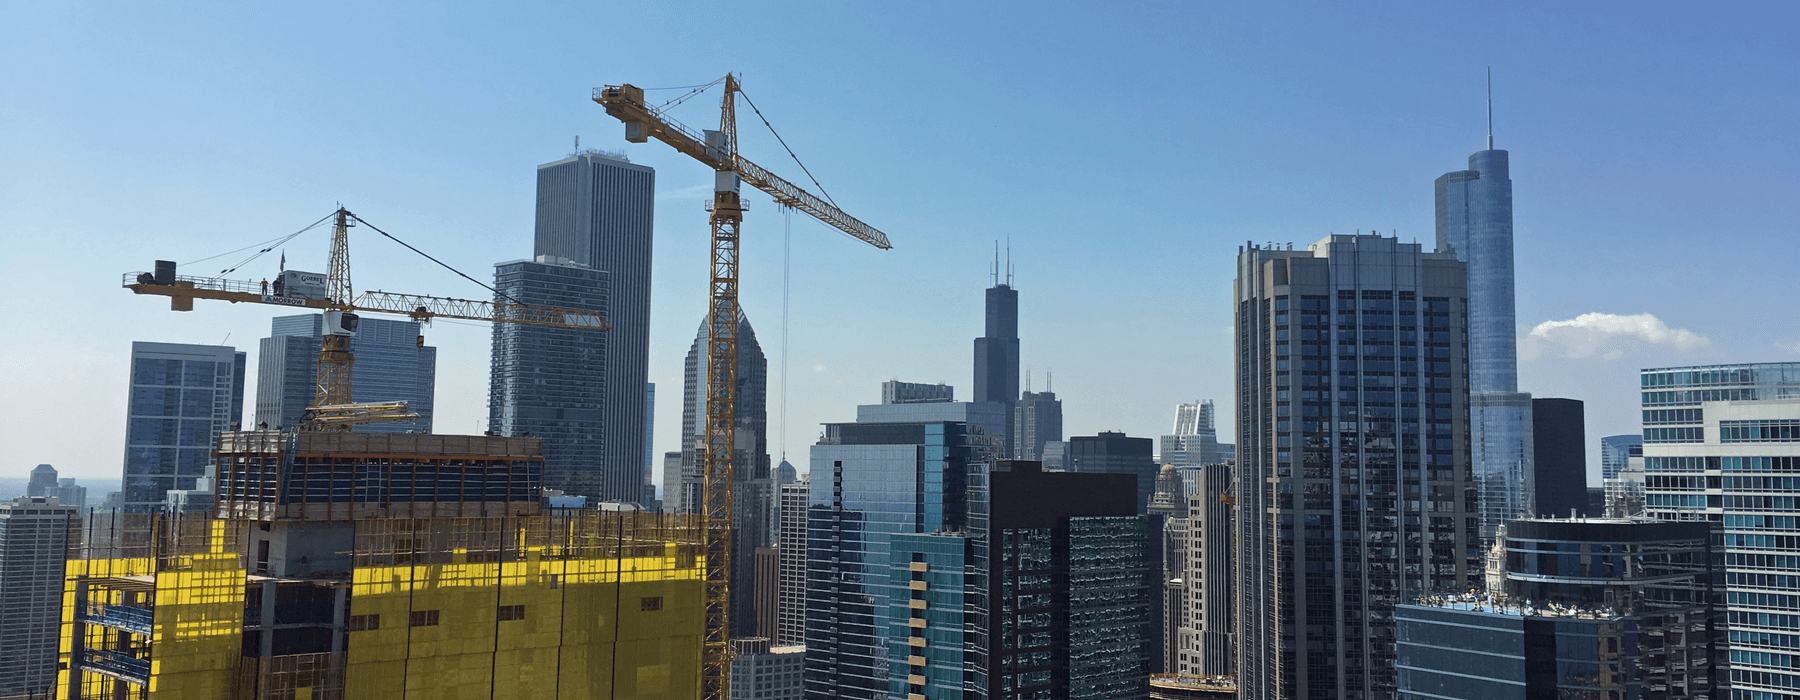 The Building Process in Chicago